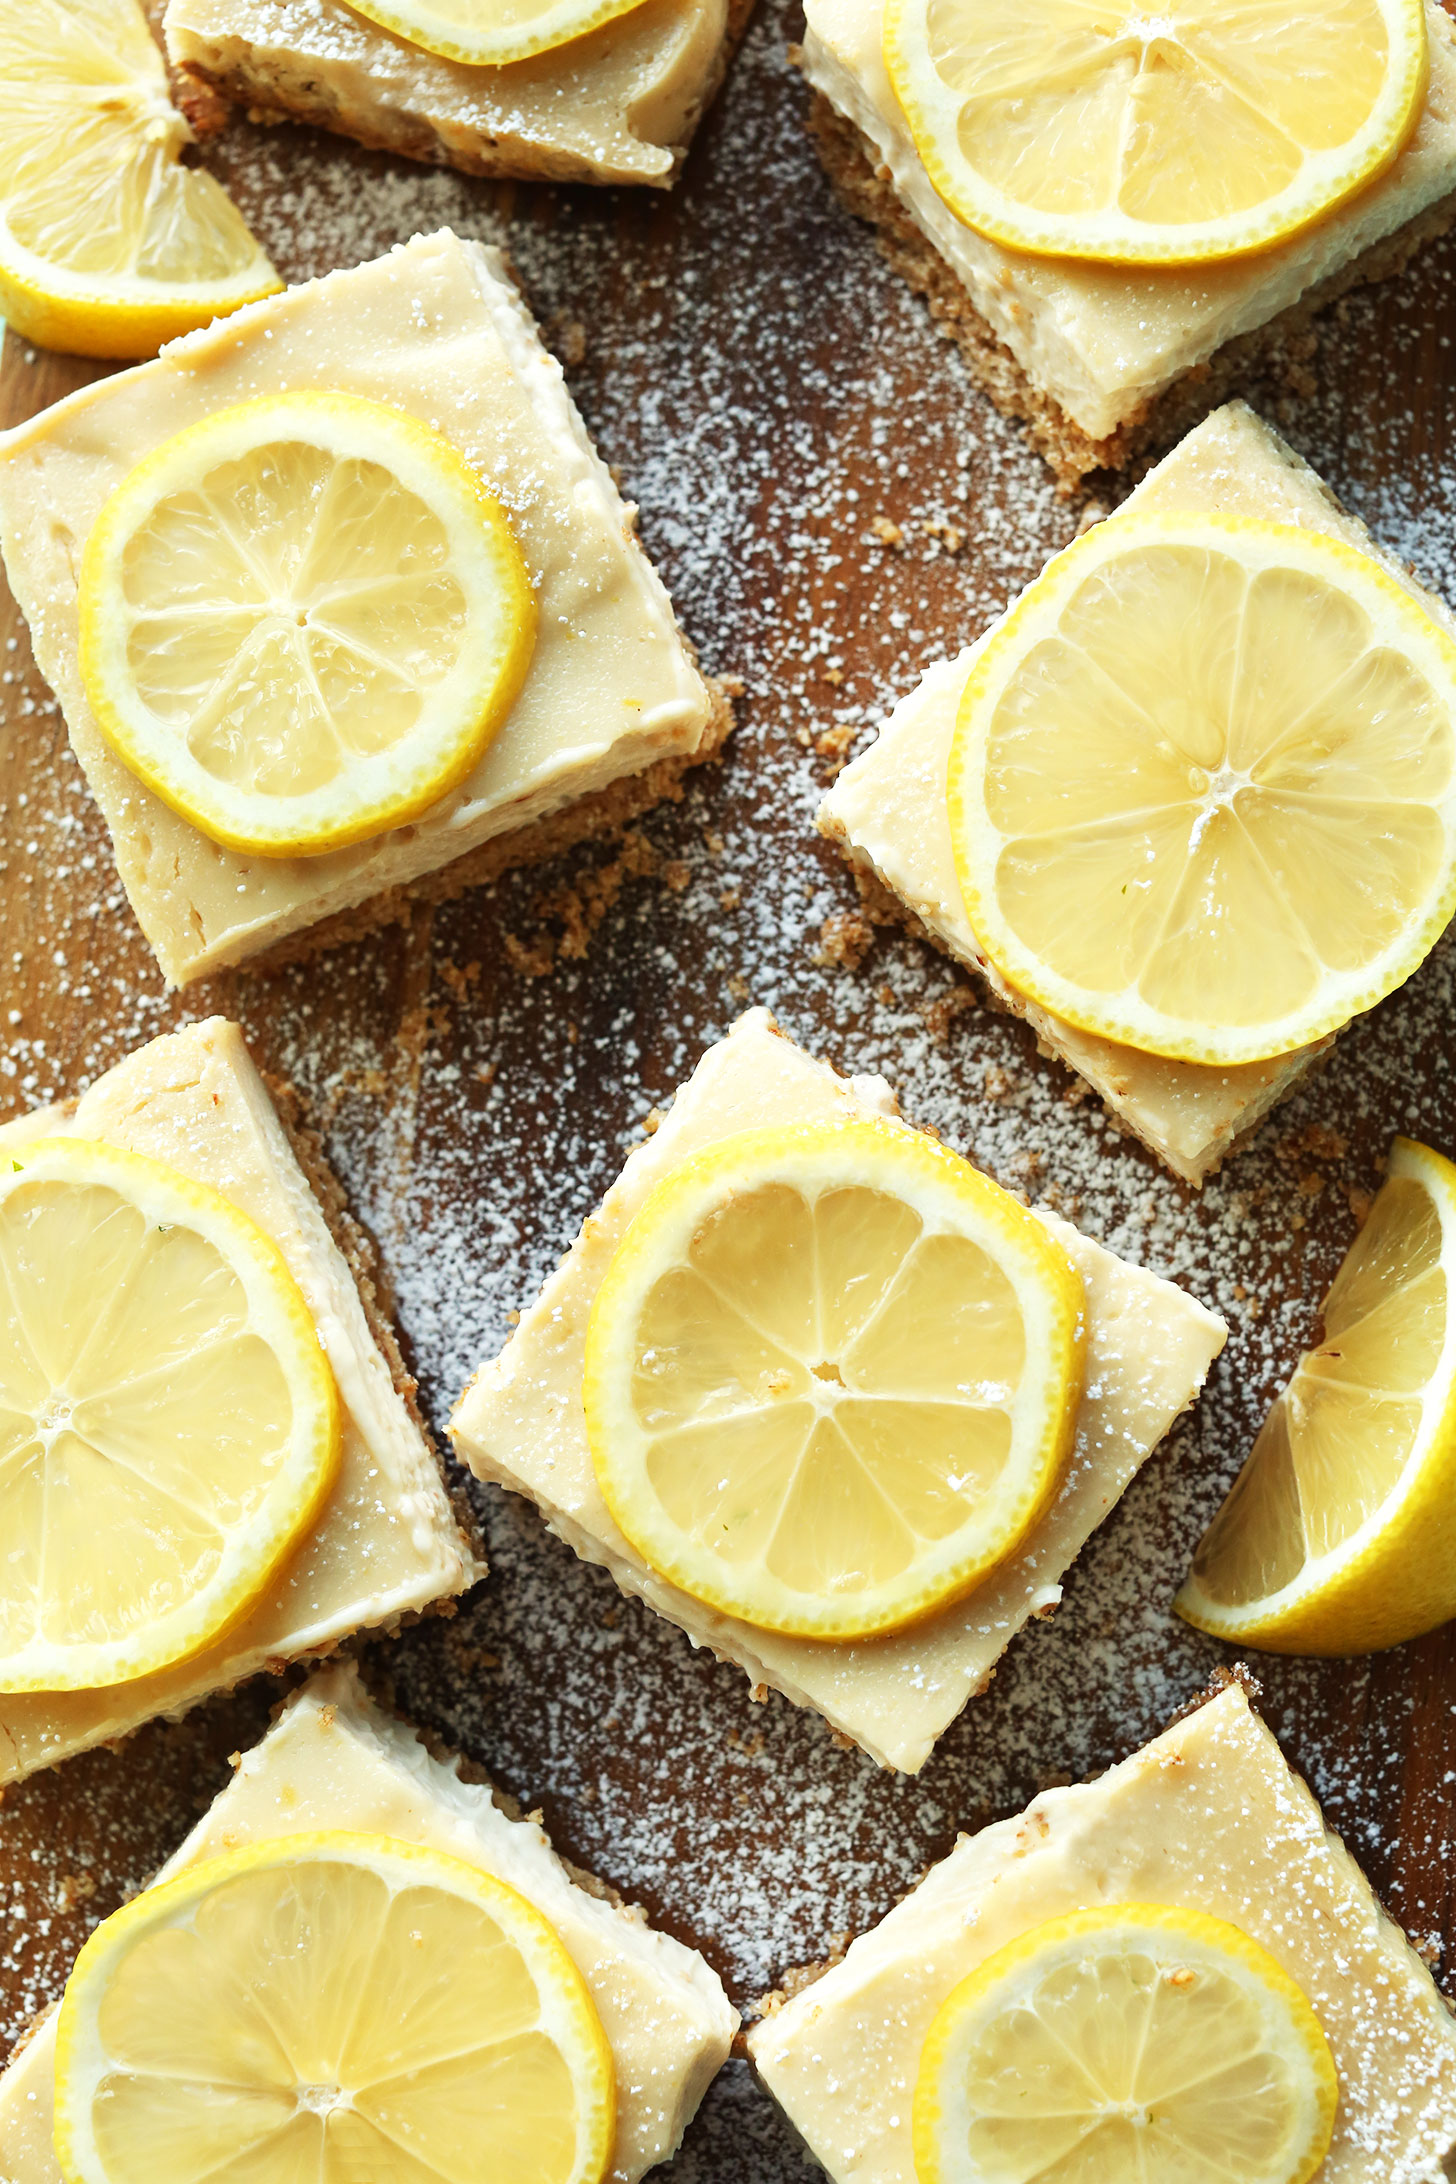 Squares of delicious homemade vegan gluten-free lemon bars on a wood board